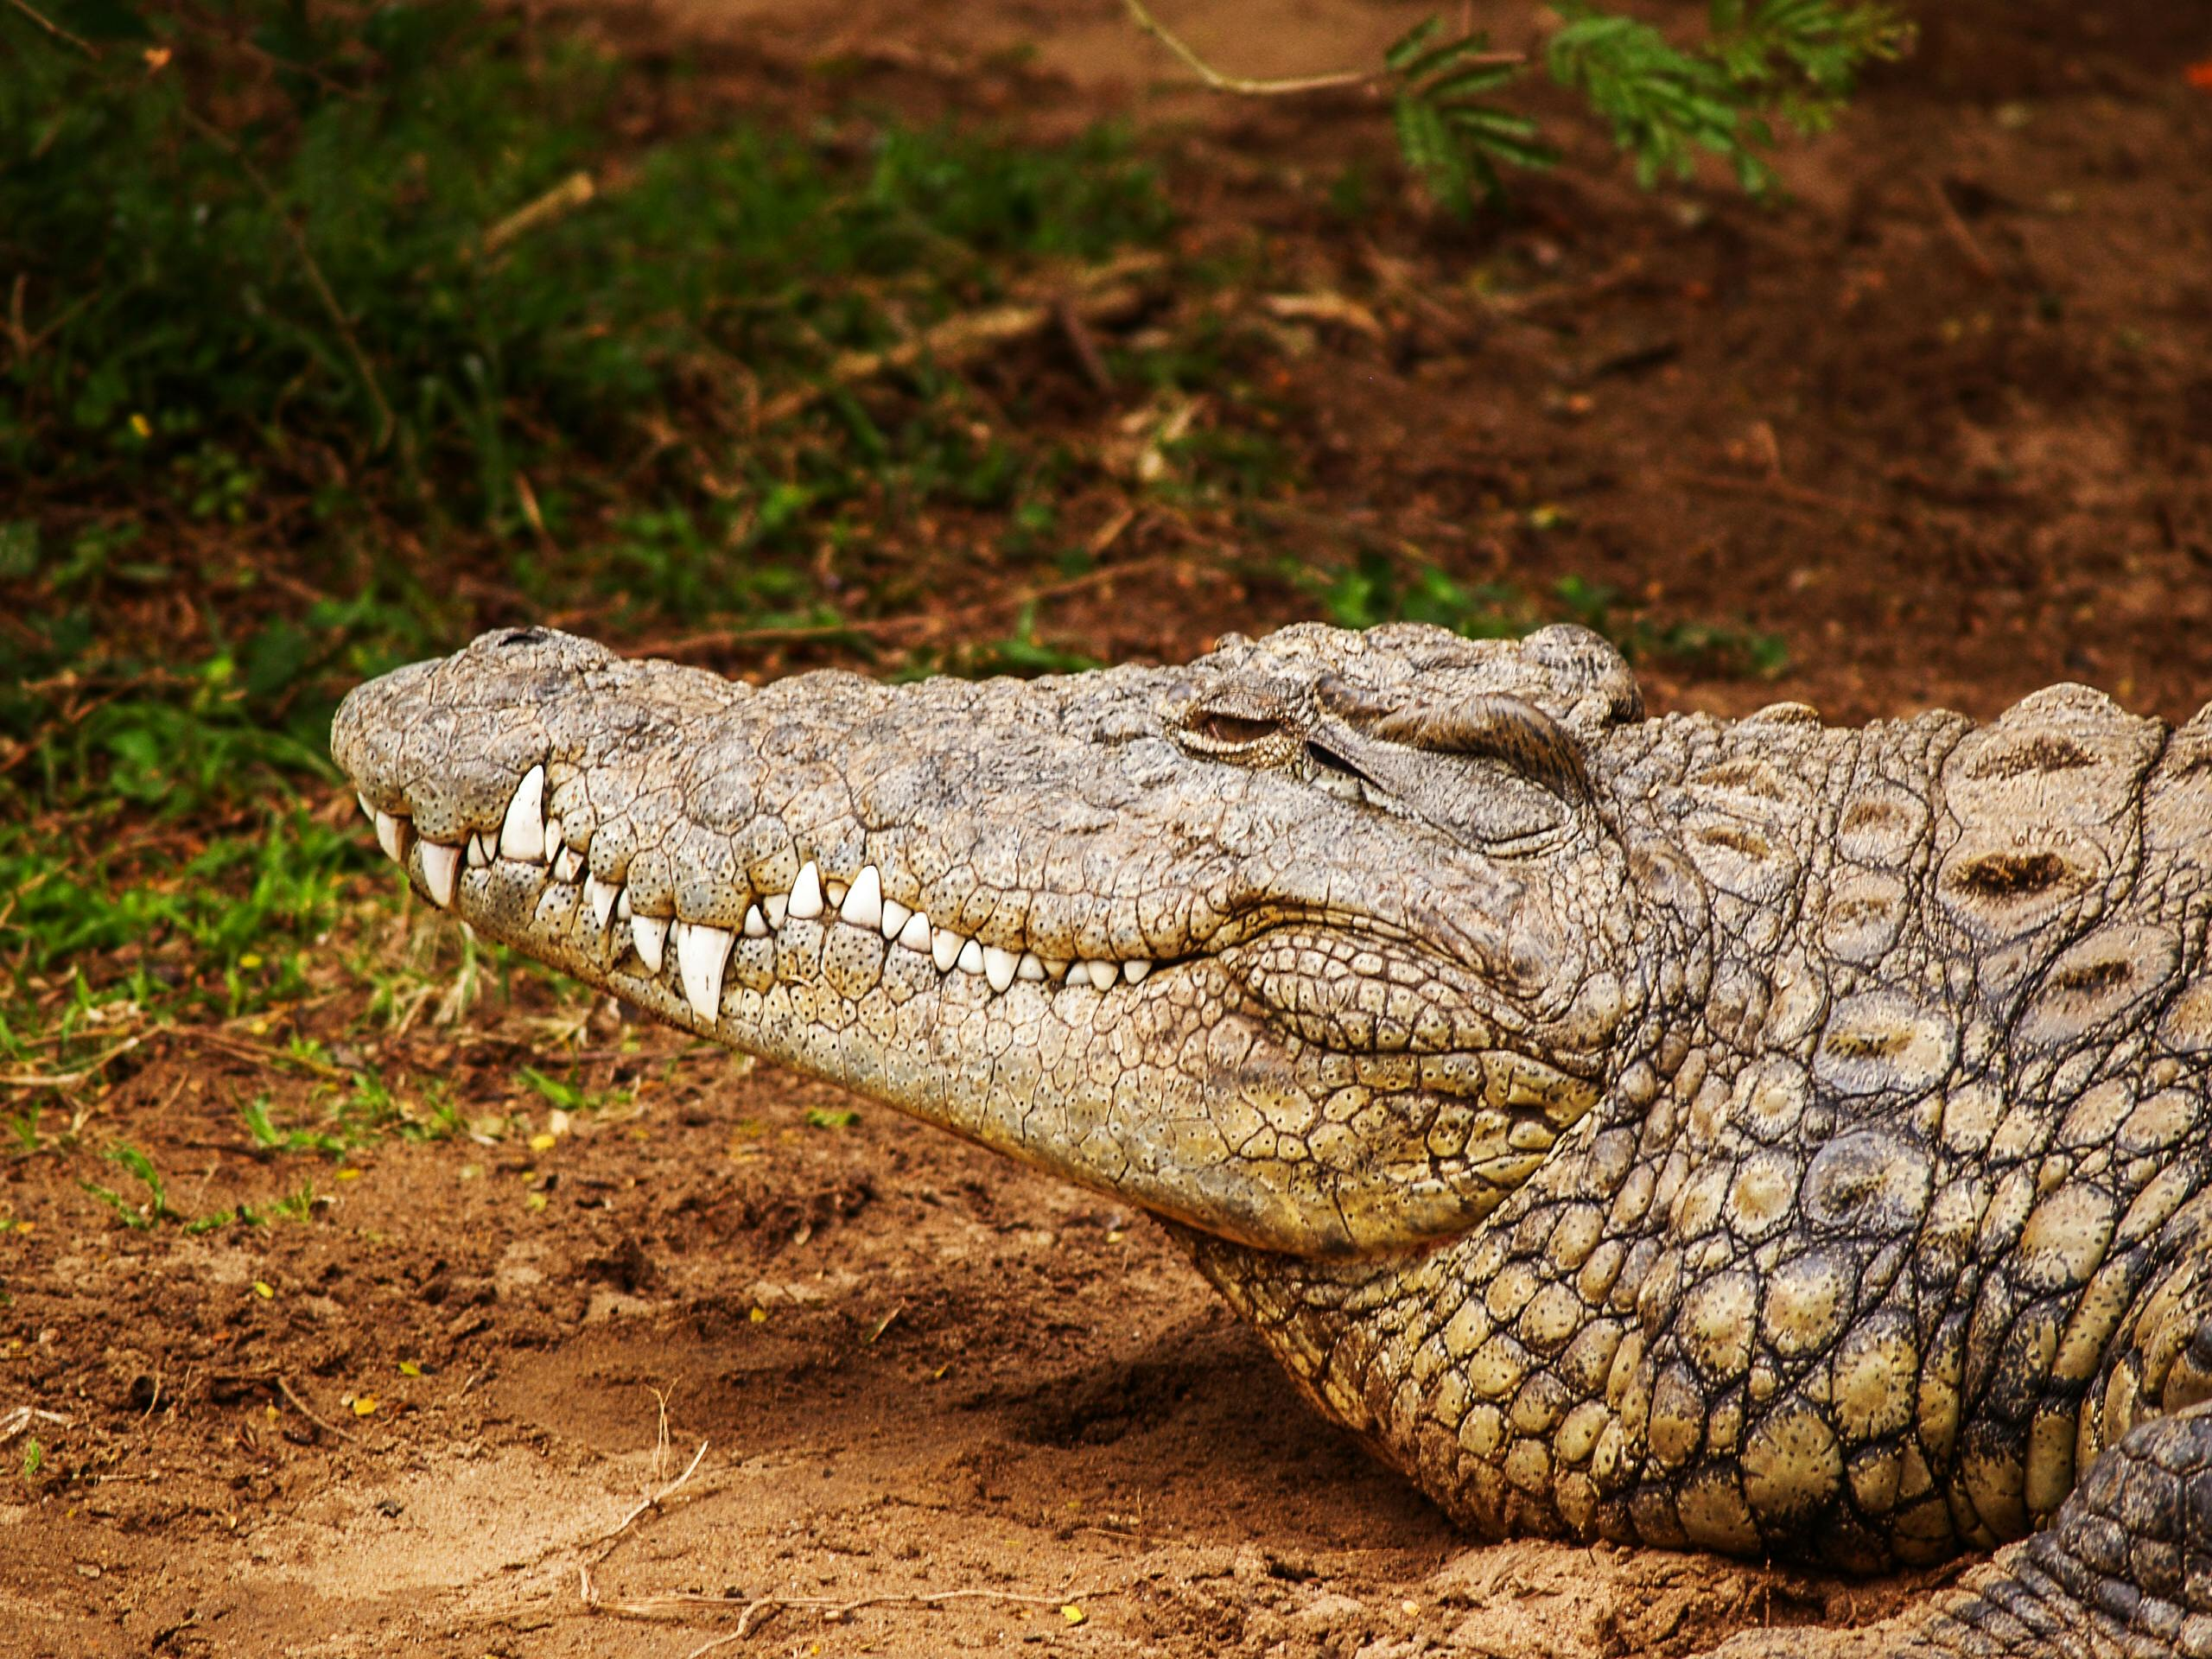 Surprising new data about Central Queensland crocodiles